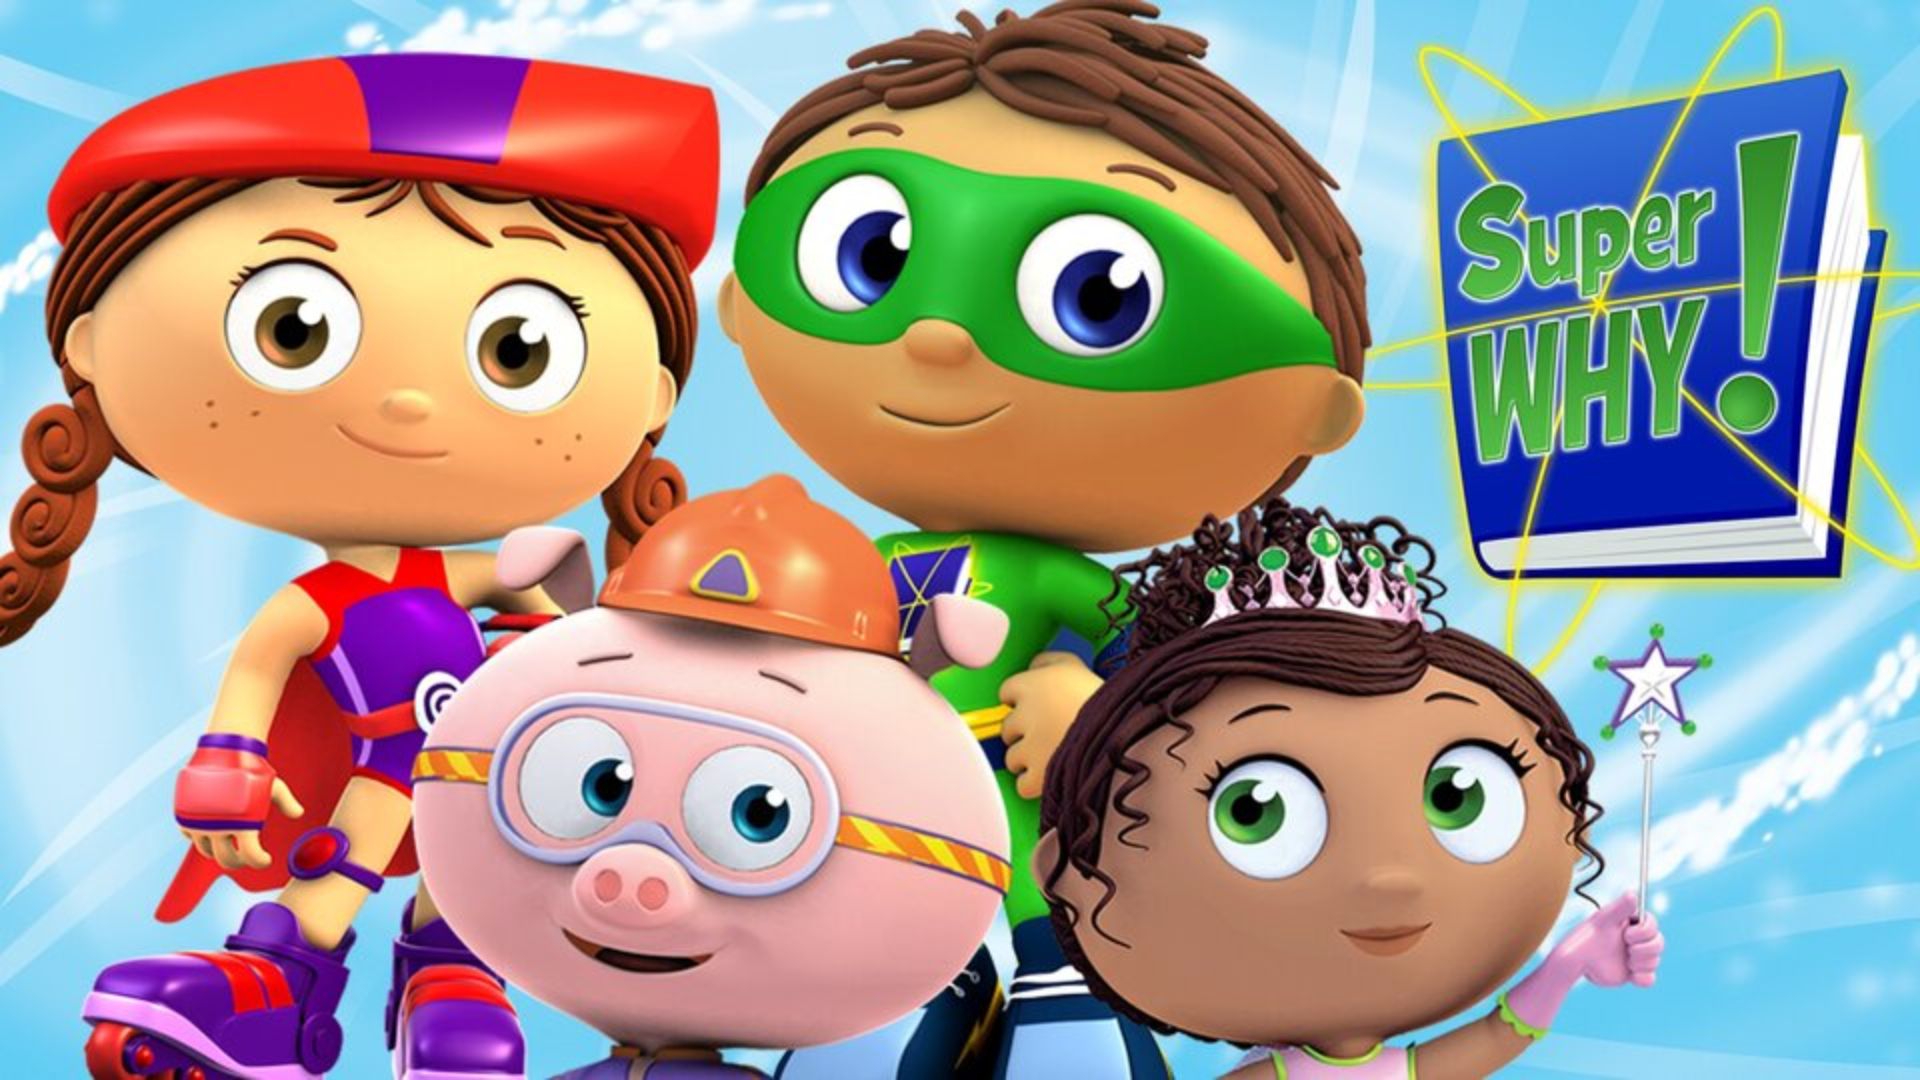 The Tortoise and the Hare | Super Why!